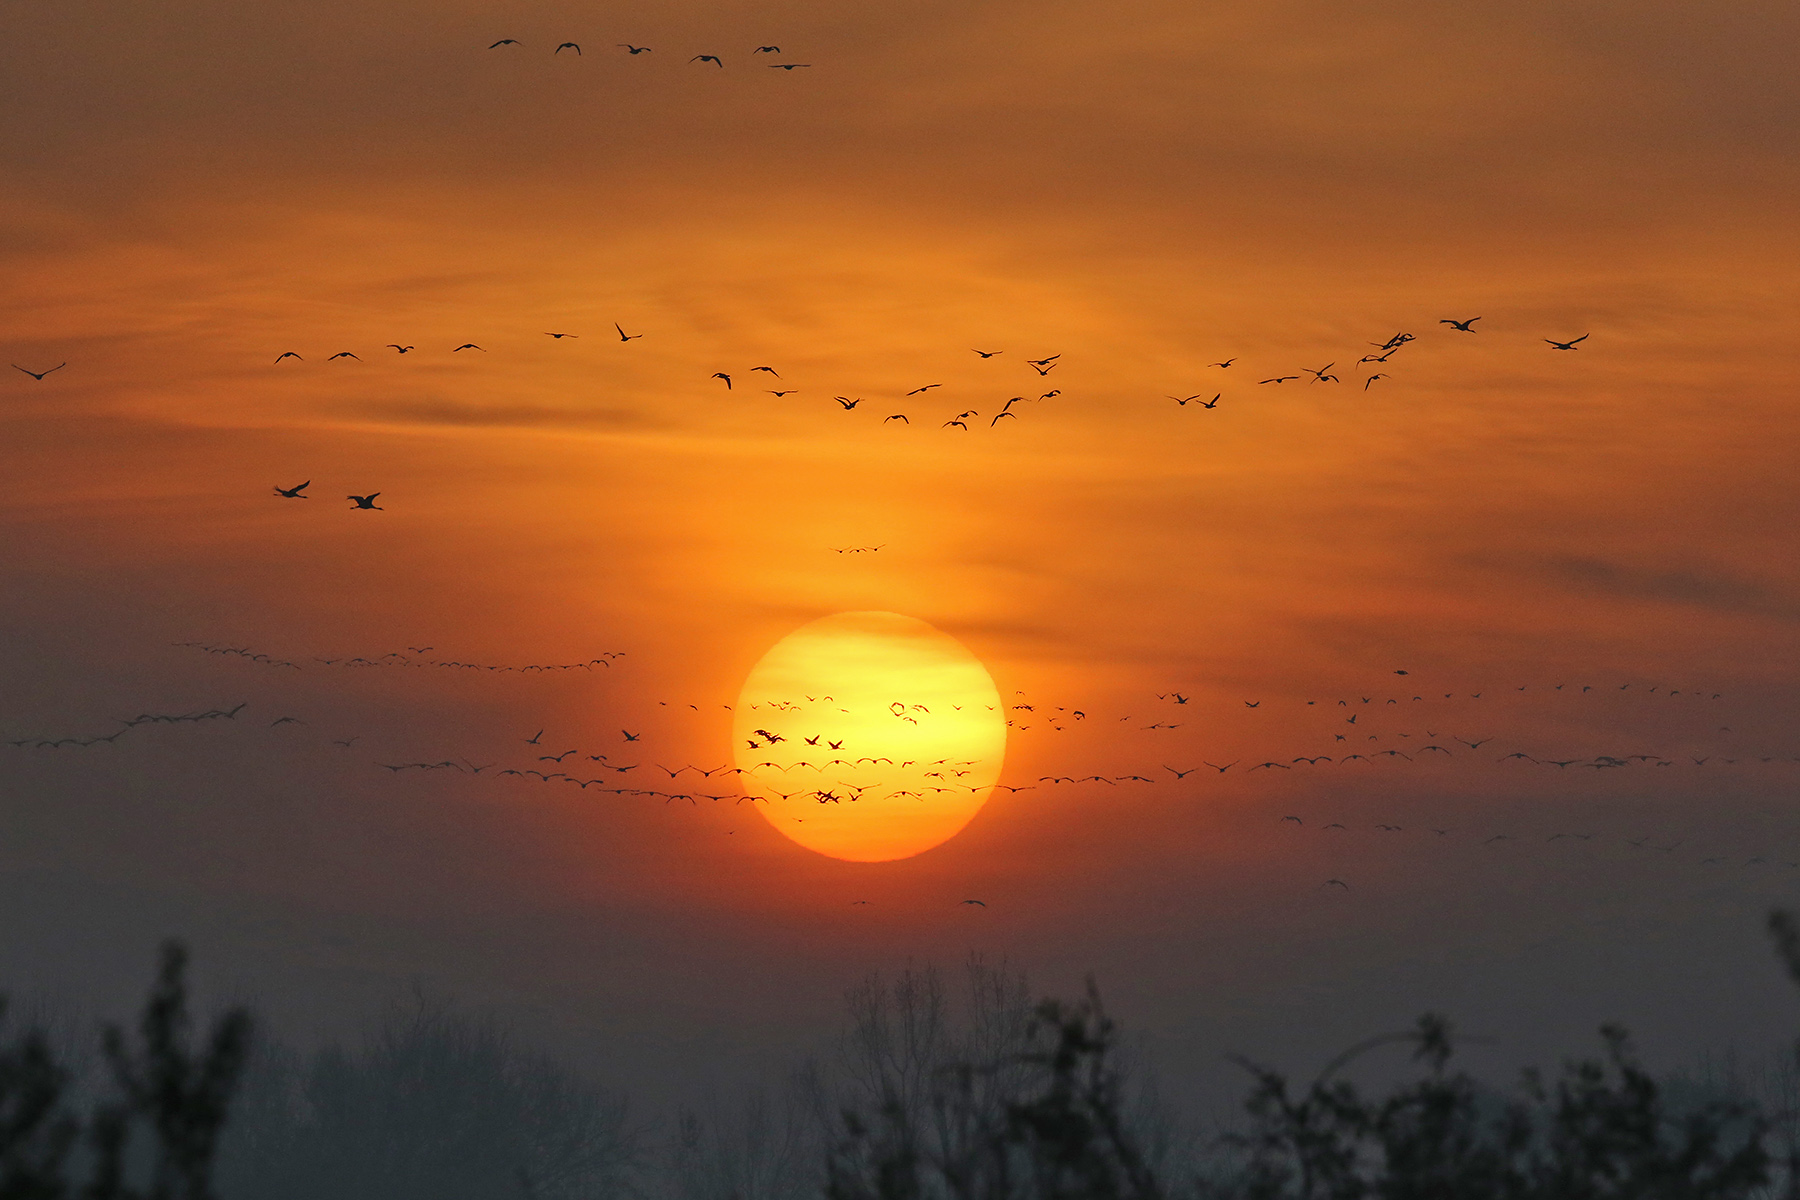 Common Cranes at sunrise in Hungary (image by János Oláh)